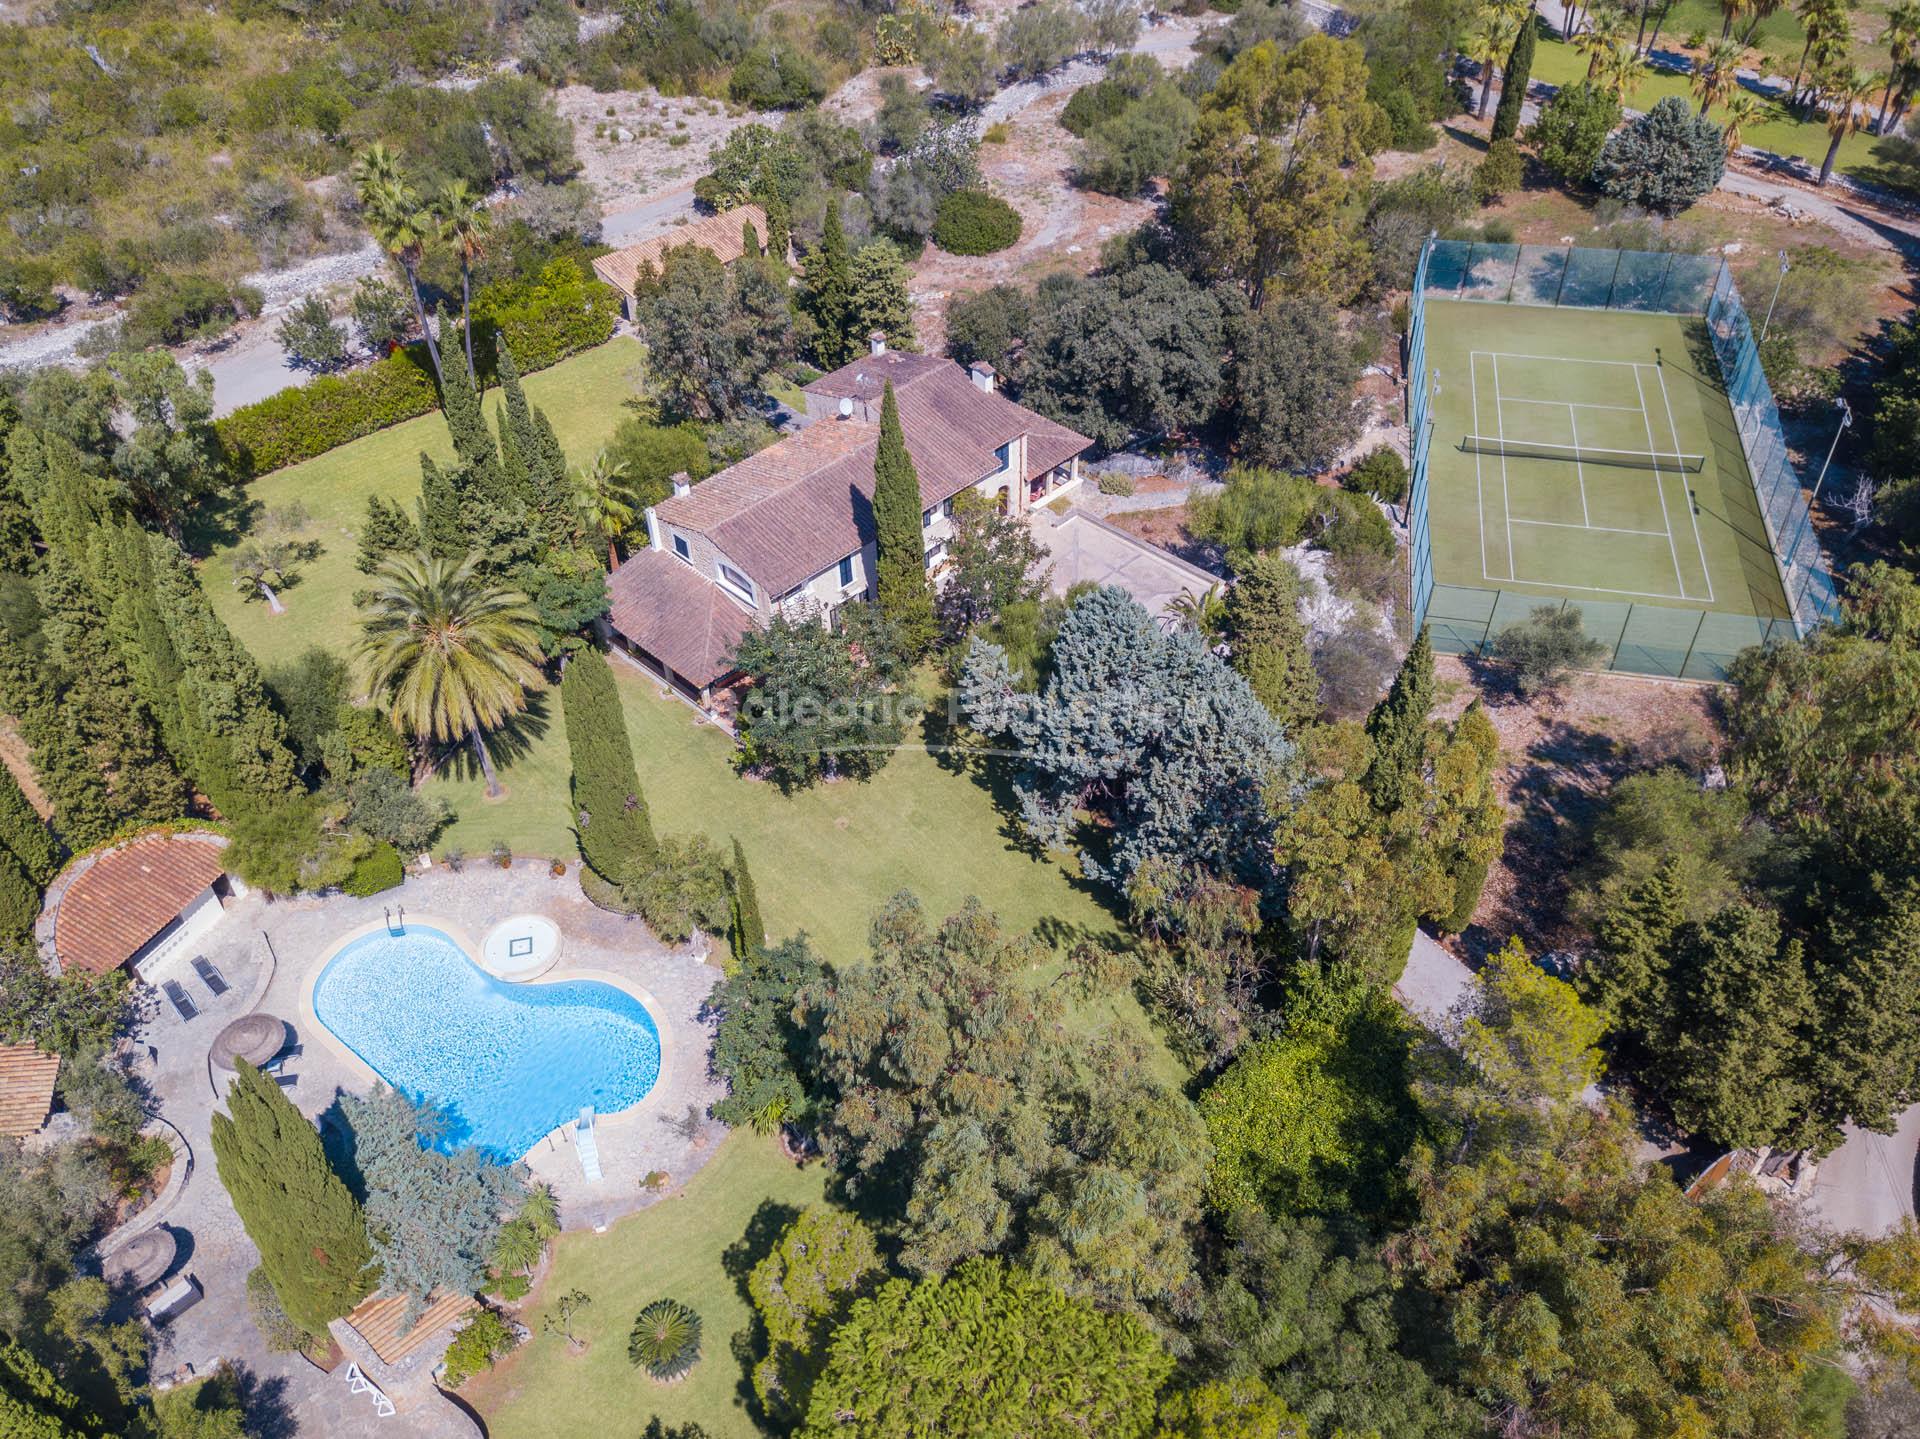 Extraordinary country home with tennis court for sale in Pollensa, Mallorca